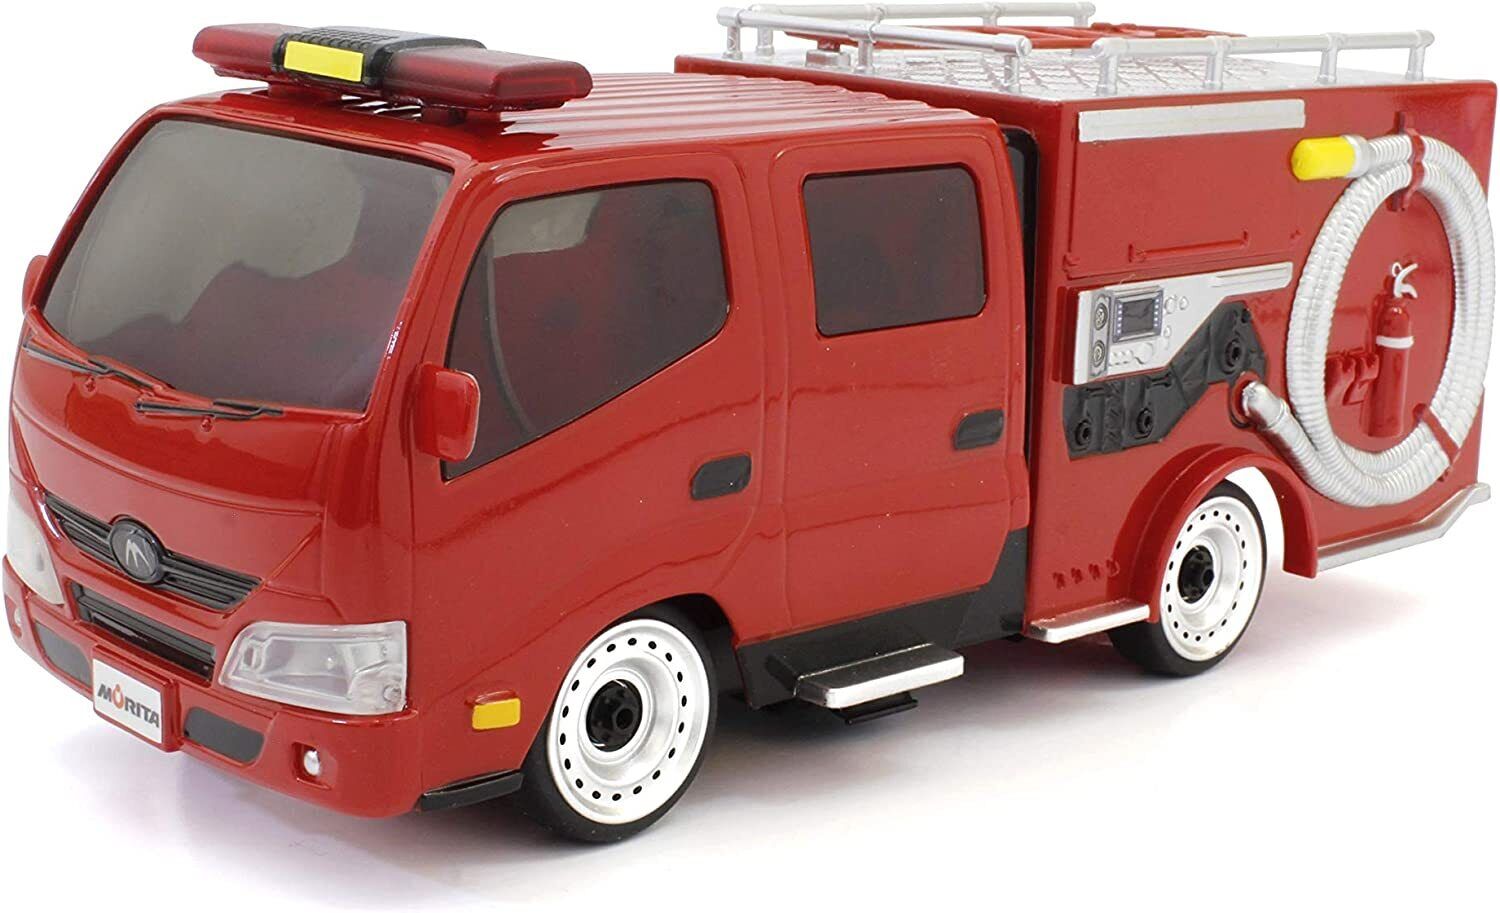 NEW Kyosho Egg 1/28 scale RC First Minute Series Morita fire engine CD-I type